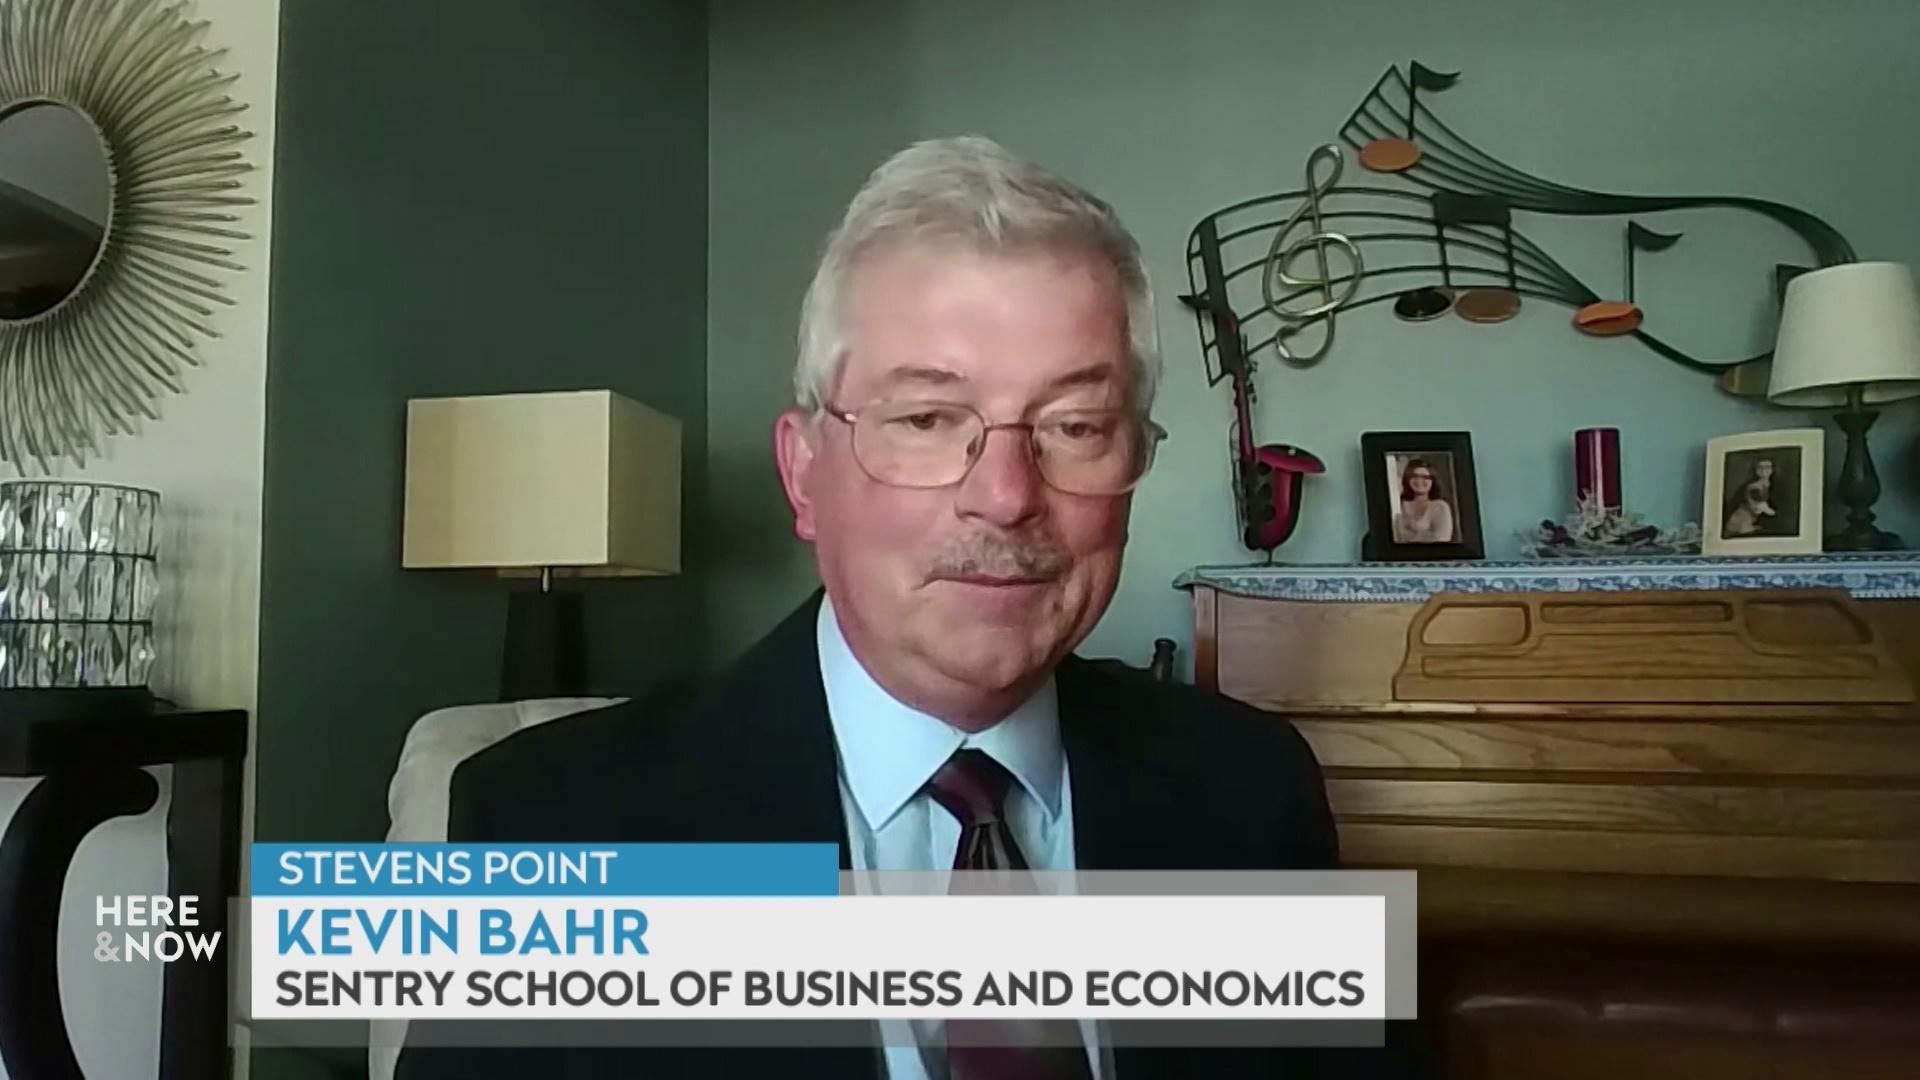 A still image from a video shows Kevin Bahr seated in front of a green wall and piano with wooden paneling with a graphic at bottom reading 'Kevin Bahr' and 'Sentry School of Business and Economics.'